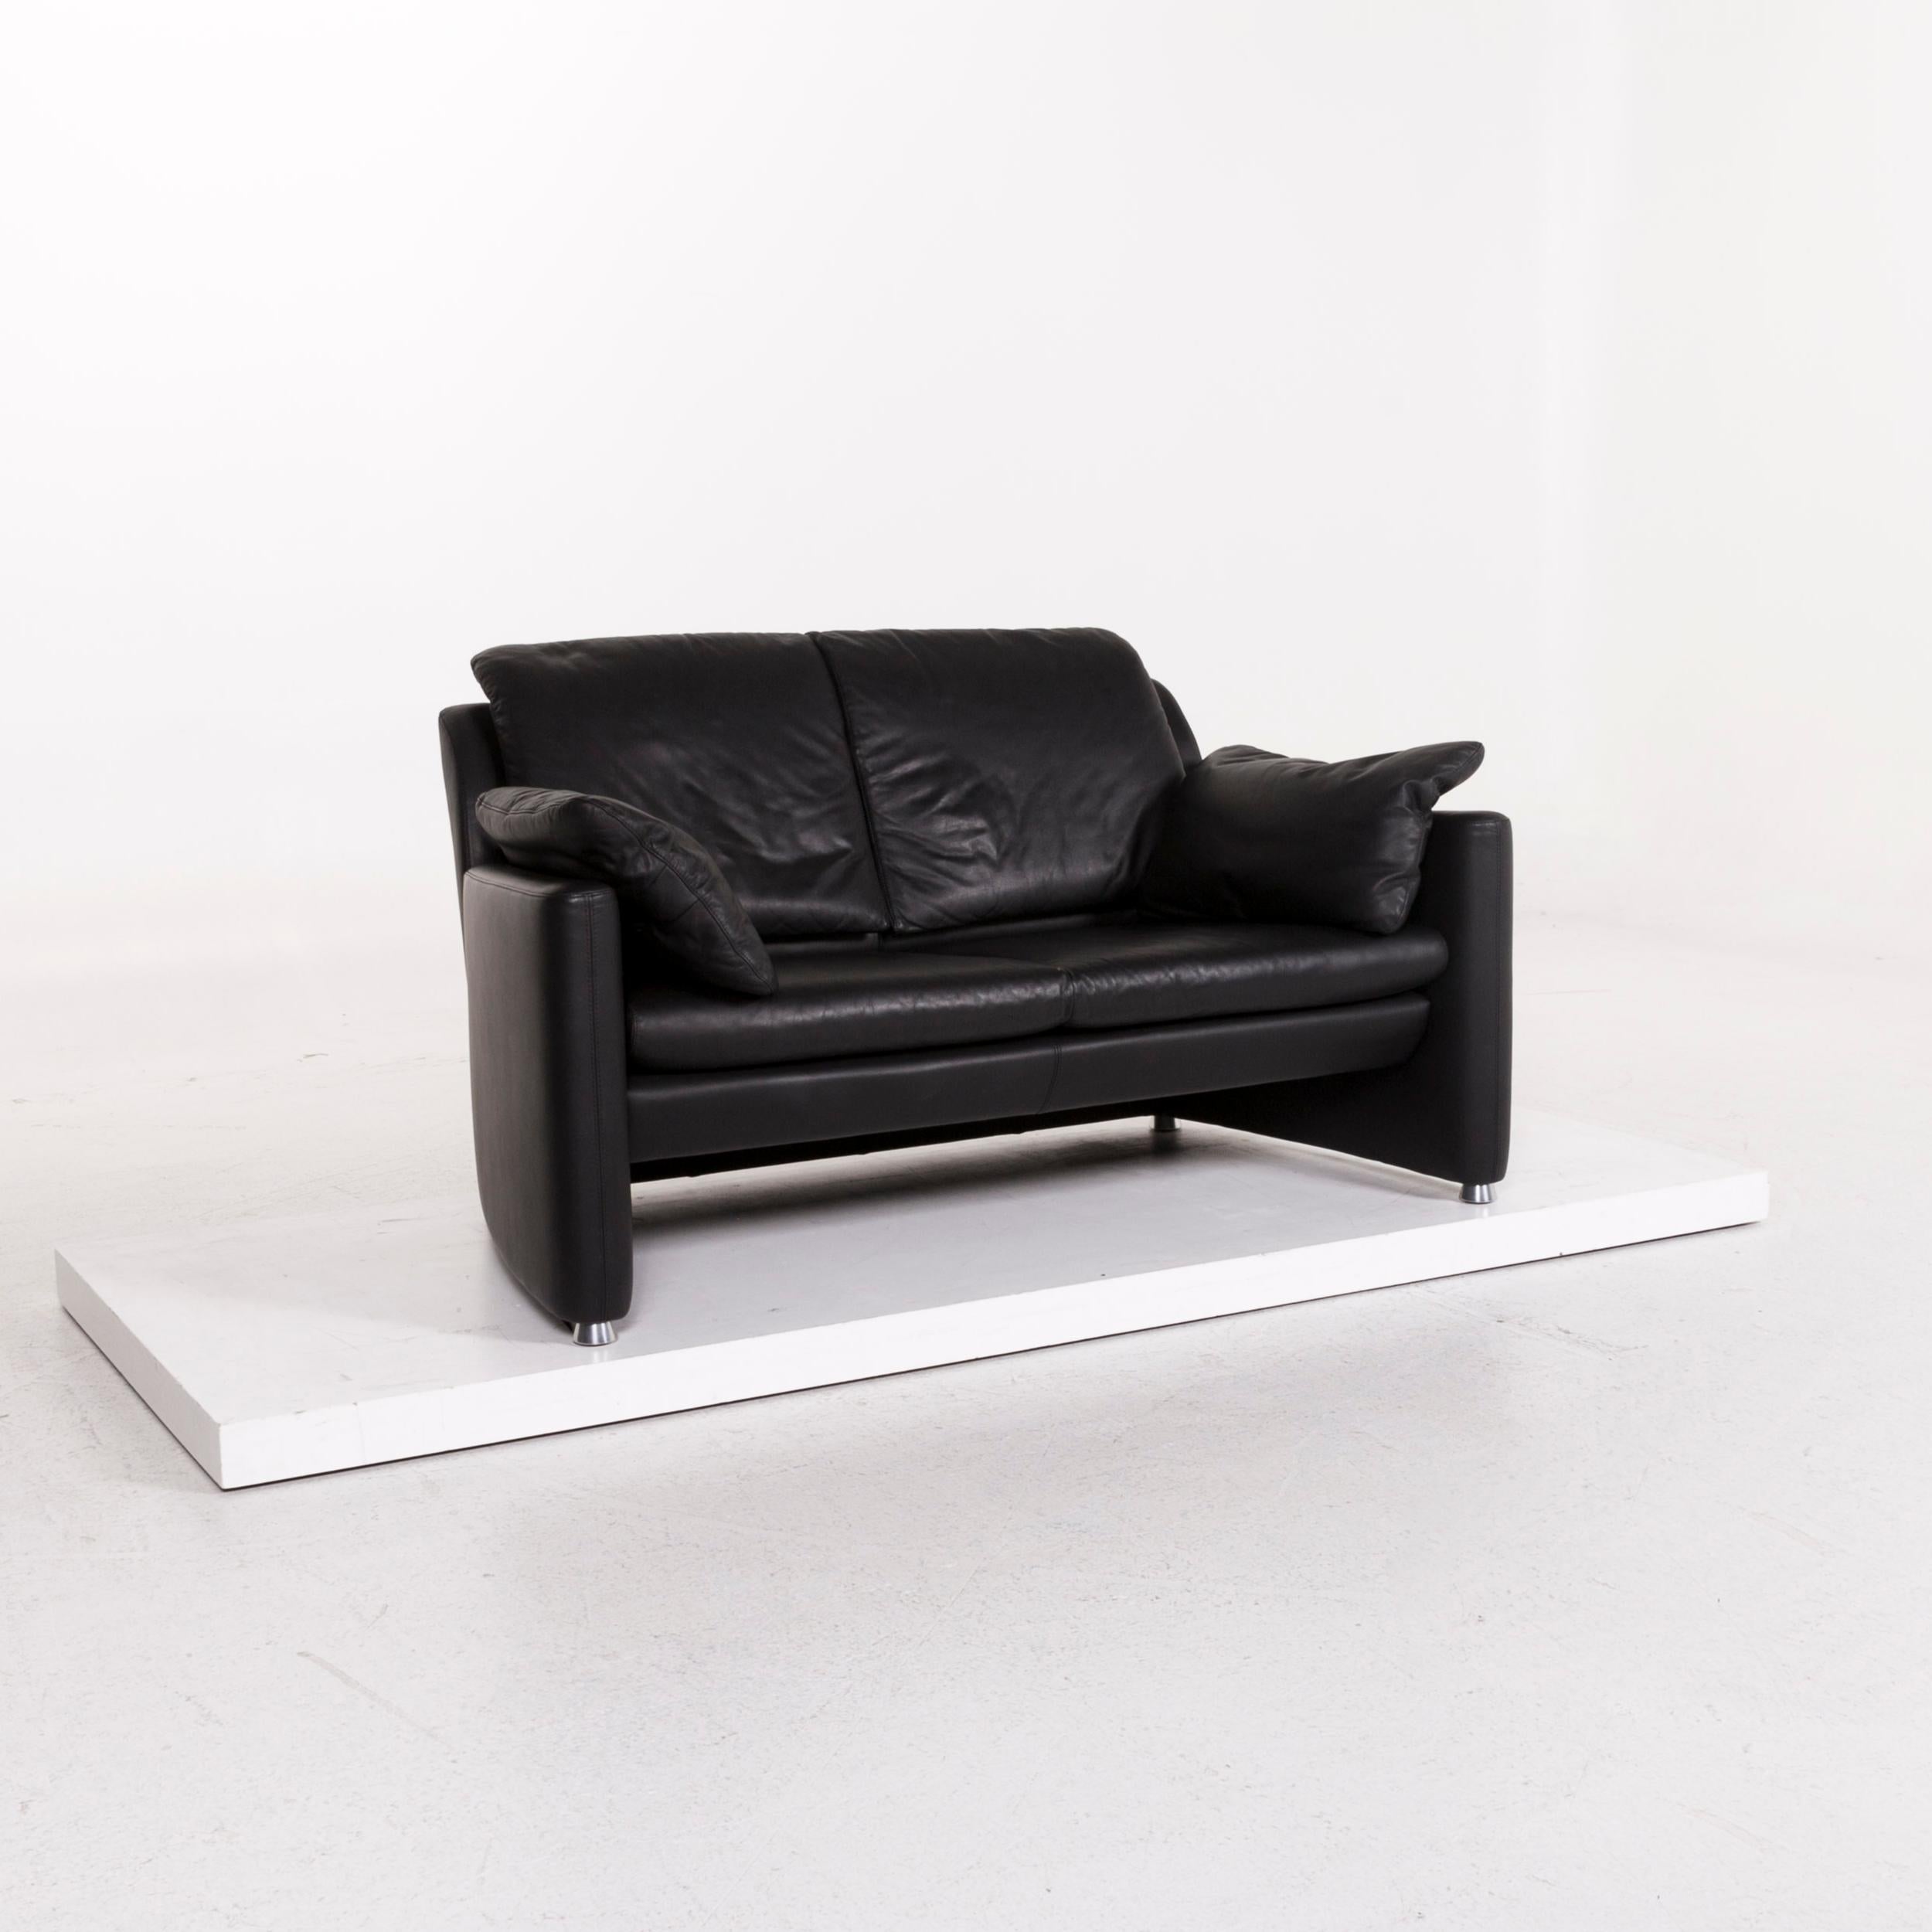 We bring to you a Leolux Fidamigo leather sofa black two-seat couch.

 

 Product measurements in centimeters:
 

Depth 94
Width 161
Height 88
Seat-height 44
Rest-height 66
Seat-depth 59
Seat-width 93
Back-height 47.